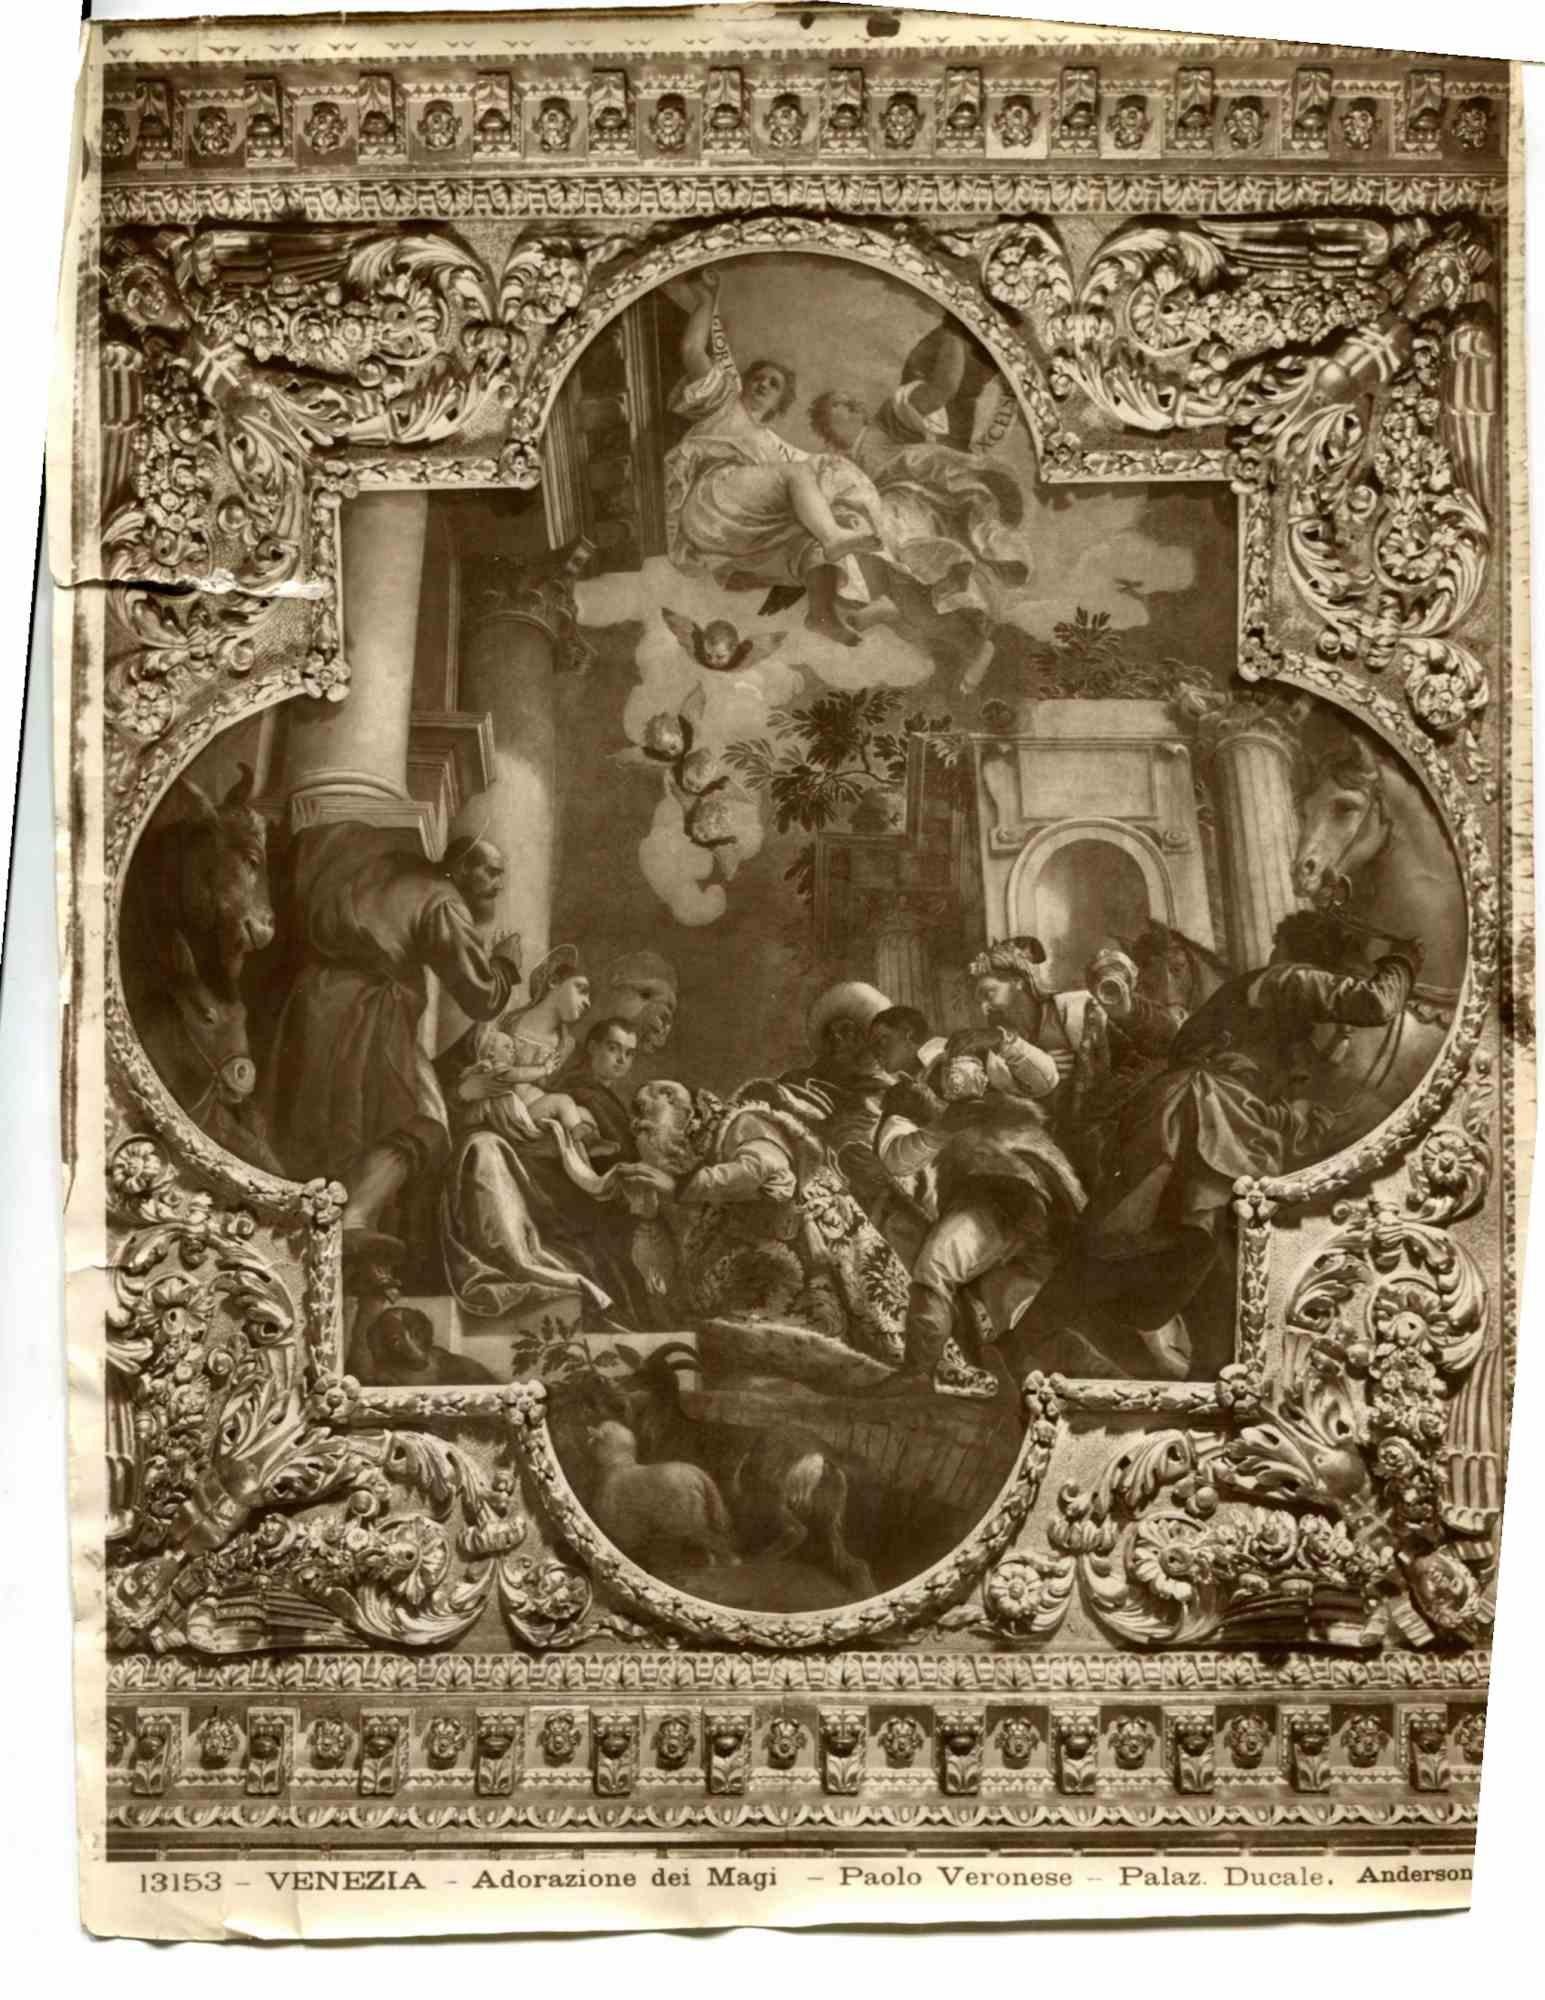 Unknown Figurative Photograph - Venice - Adoration of the Magi - Vintage Photo - Early 20th Century